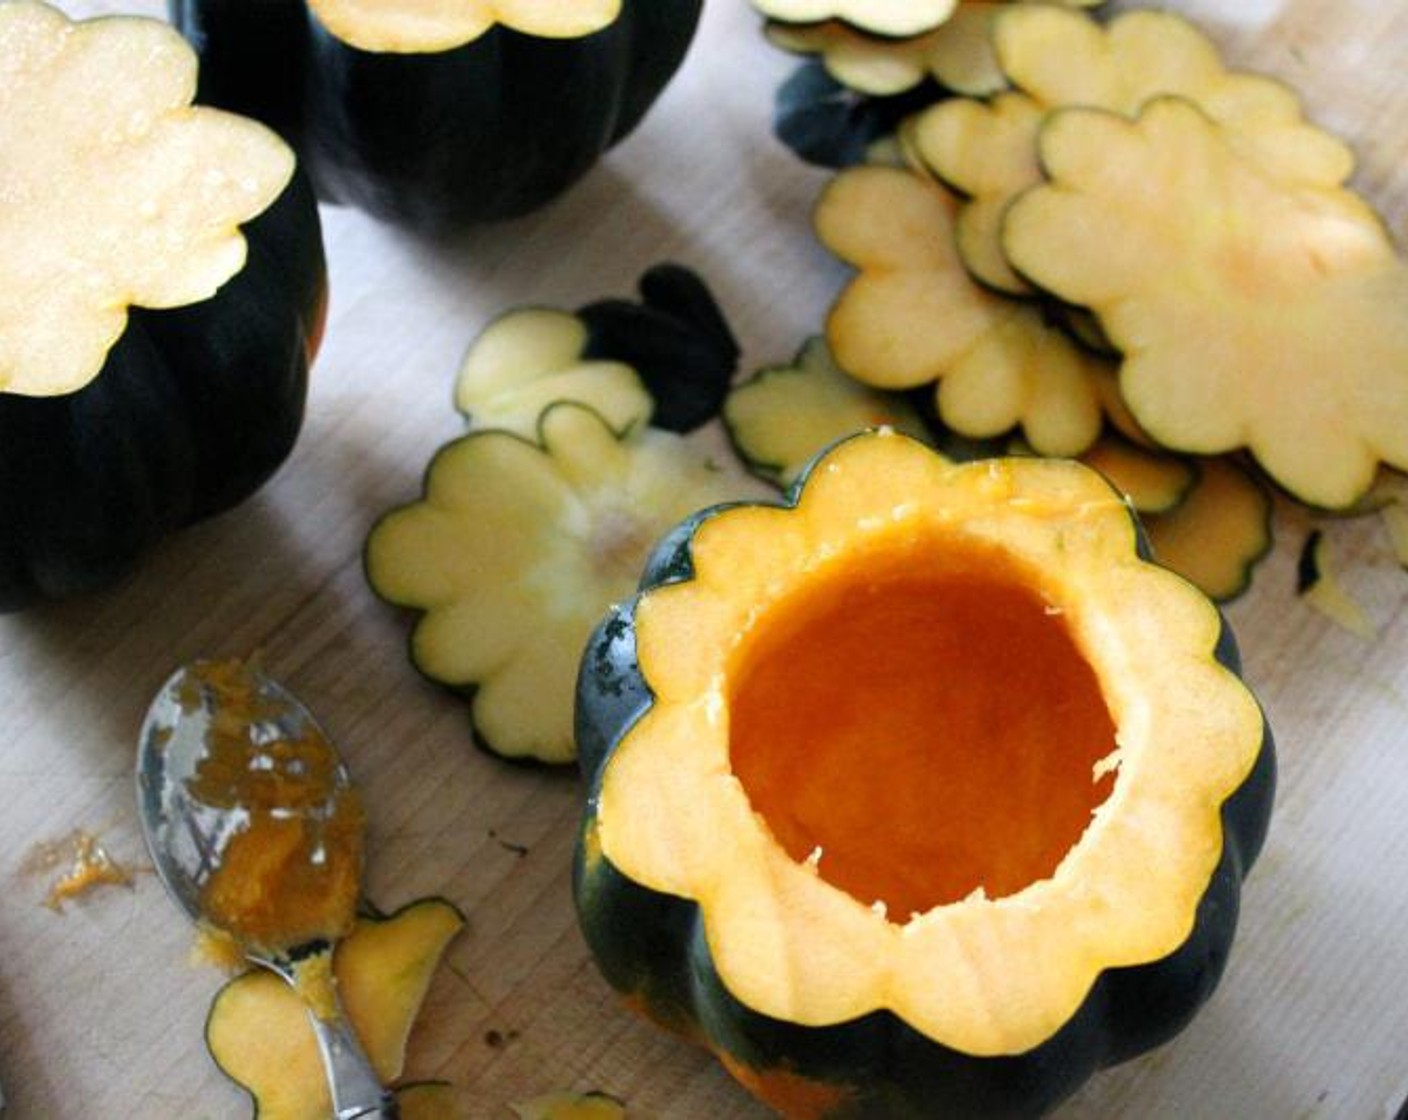 step 2 Turn each Acorn Squash (4) on its side and slice an inch off the stem end, removing and discarding the stem. Using a spoon, scoop out the seeds and flesh. Slice 1/4 inch off the bottom end of the squash so it doesn't wobble. Scoop out the seeds and stringy parts.